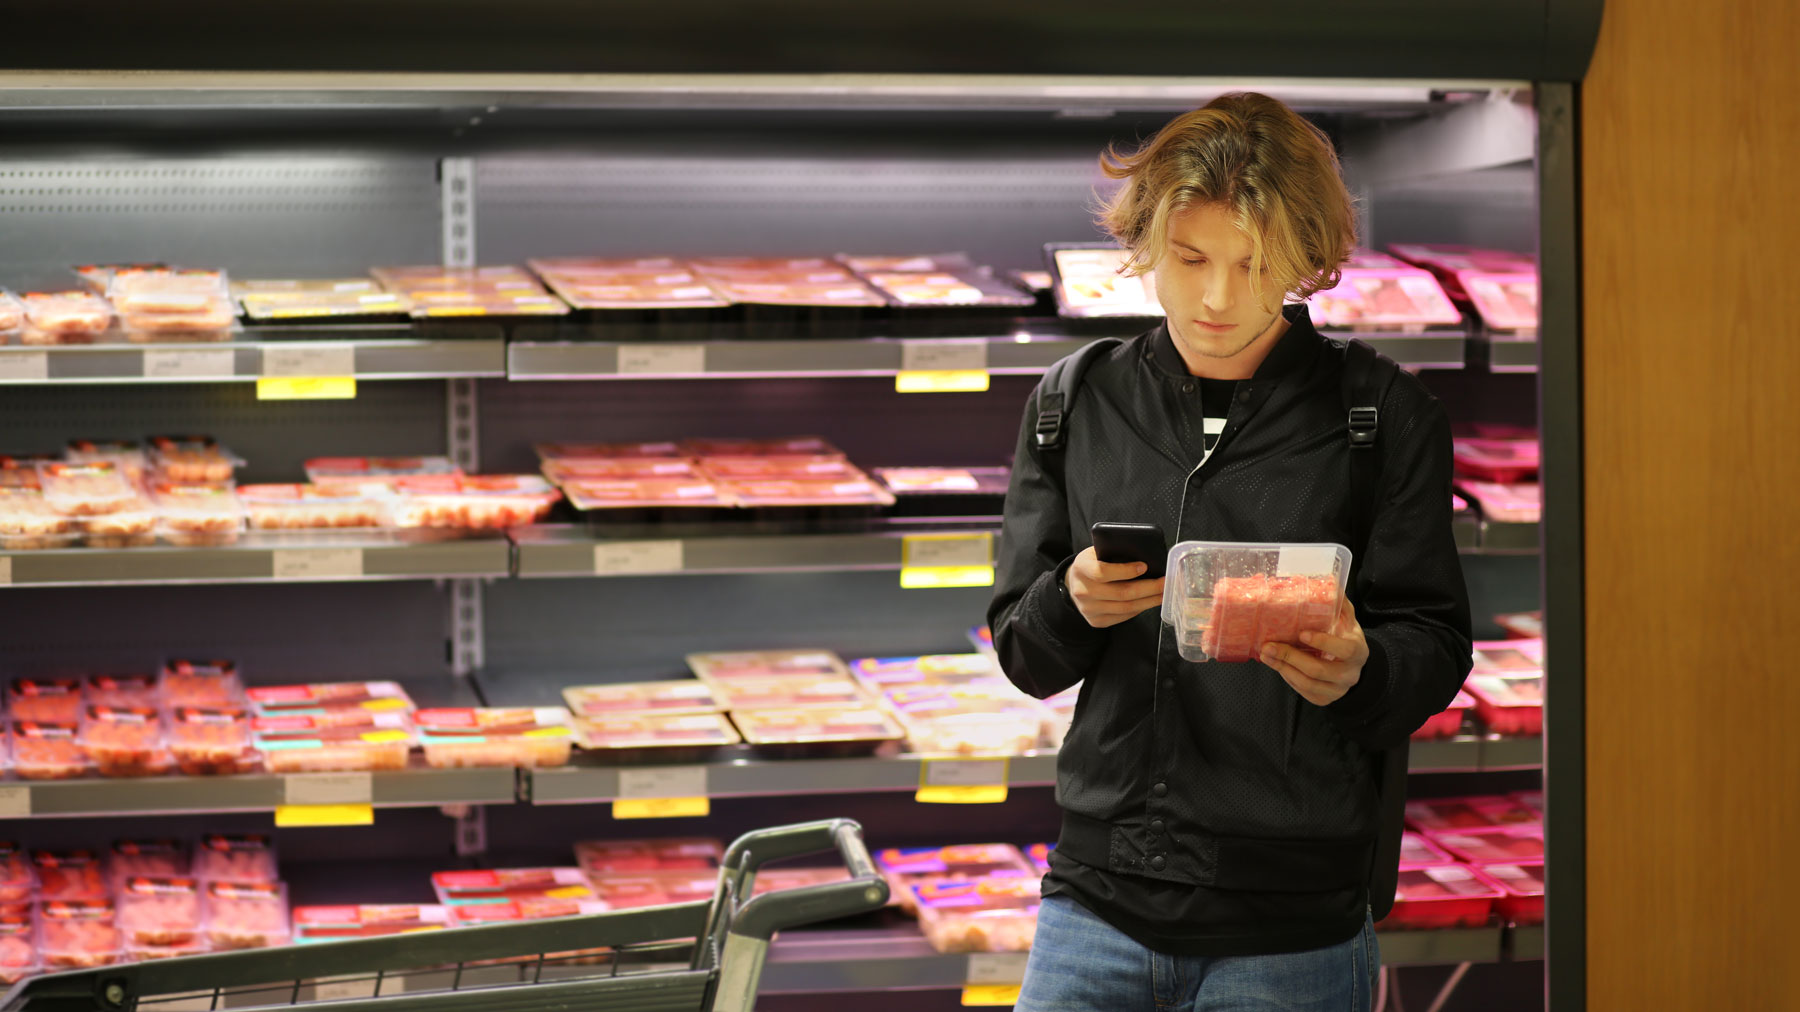 Businesses target shoppers clueless about meat